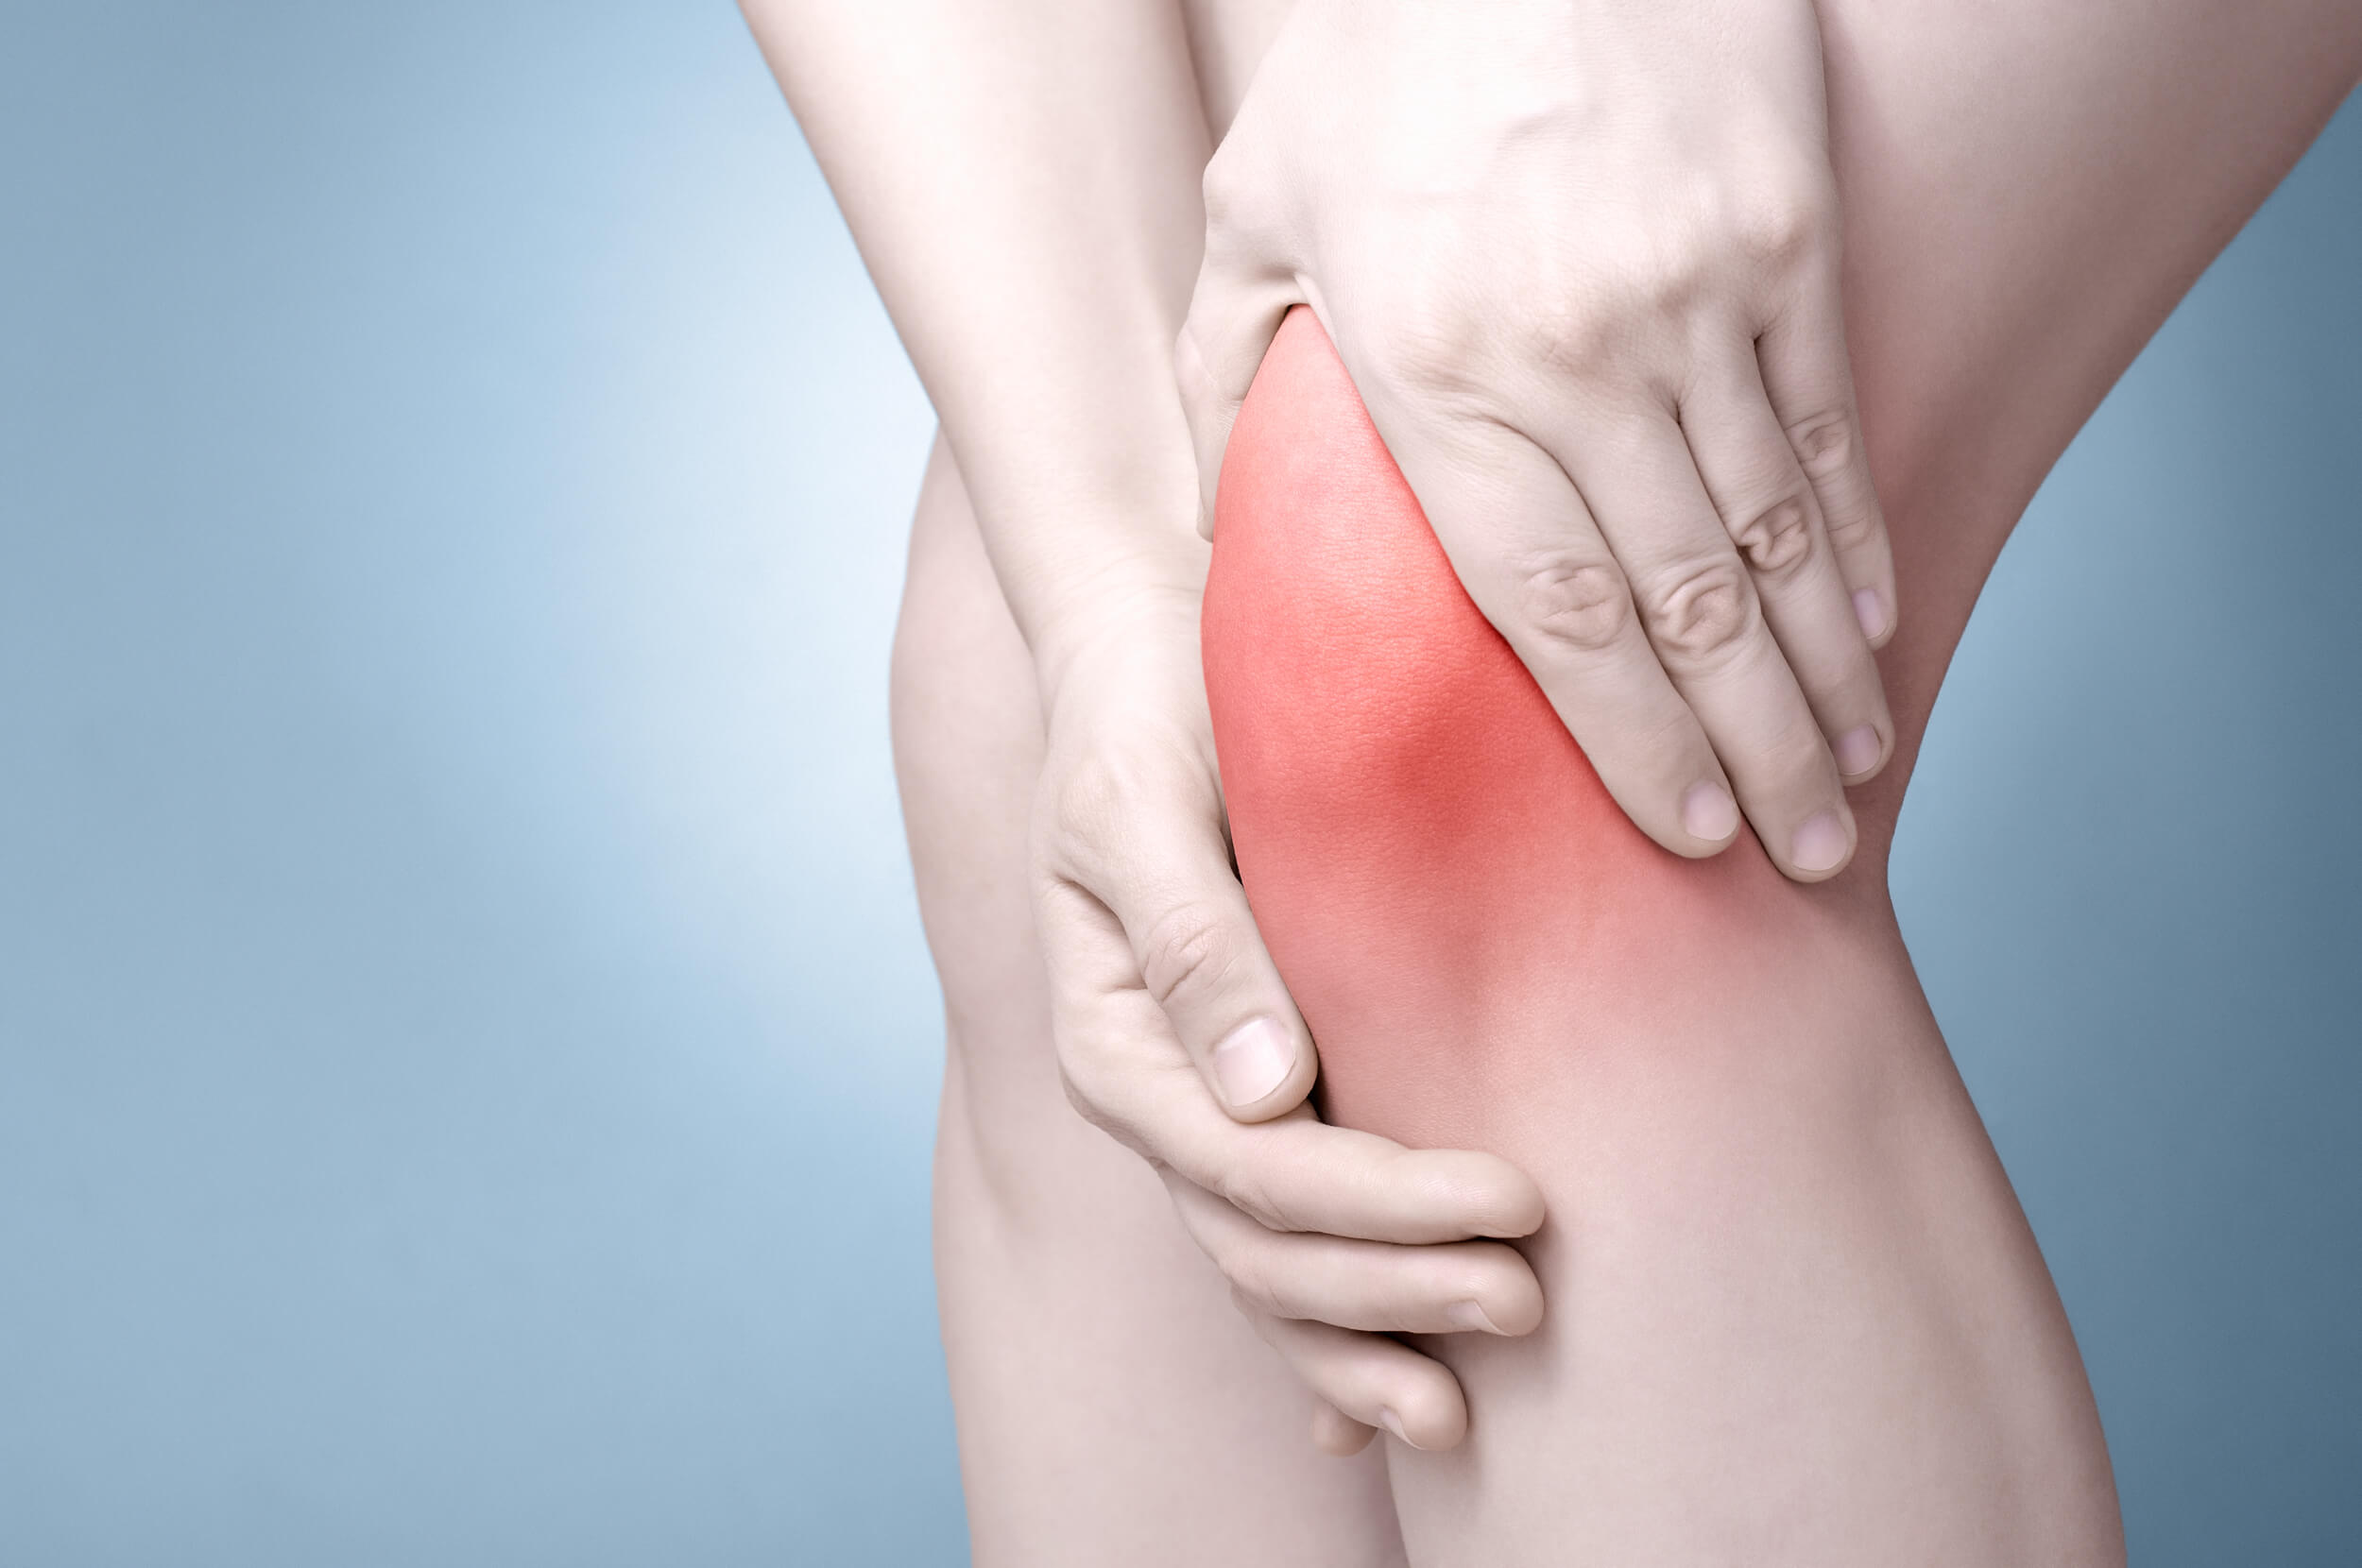 How to get rid of knee pain fast